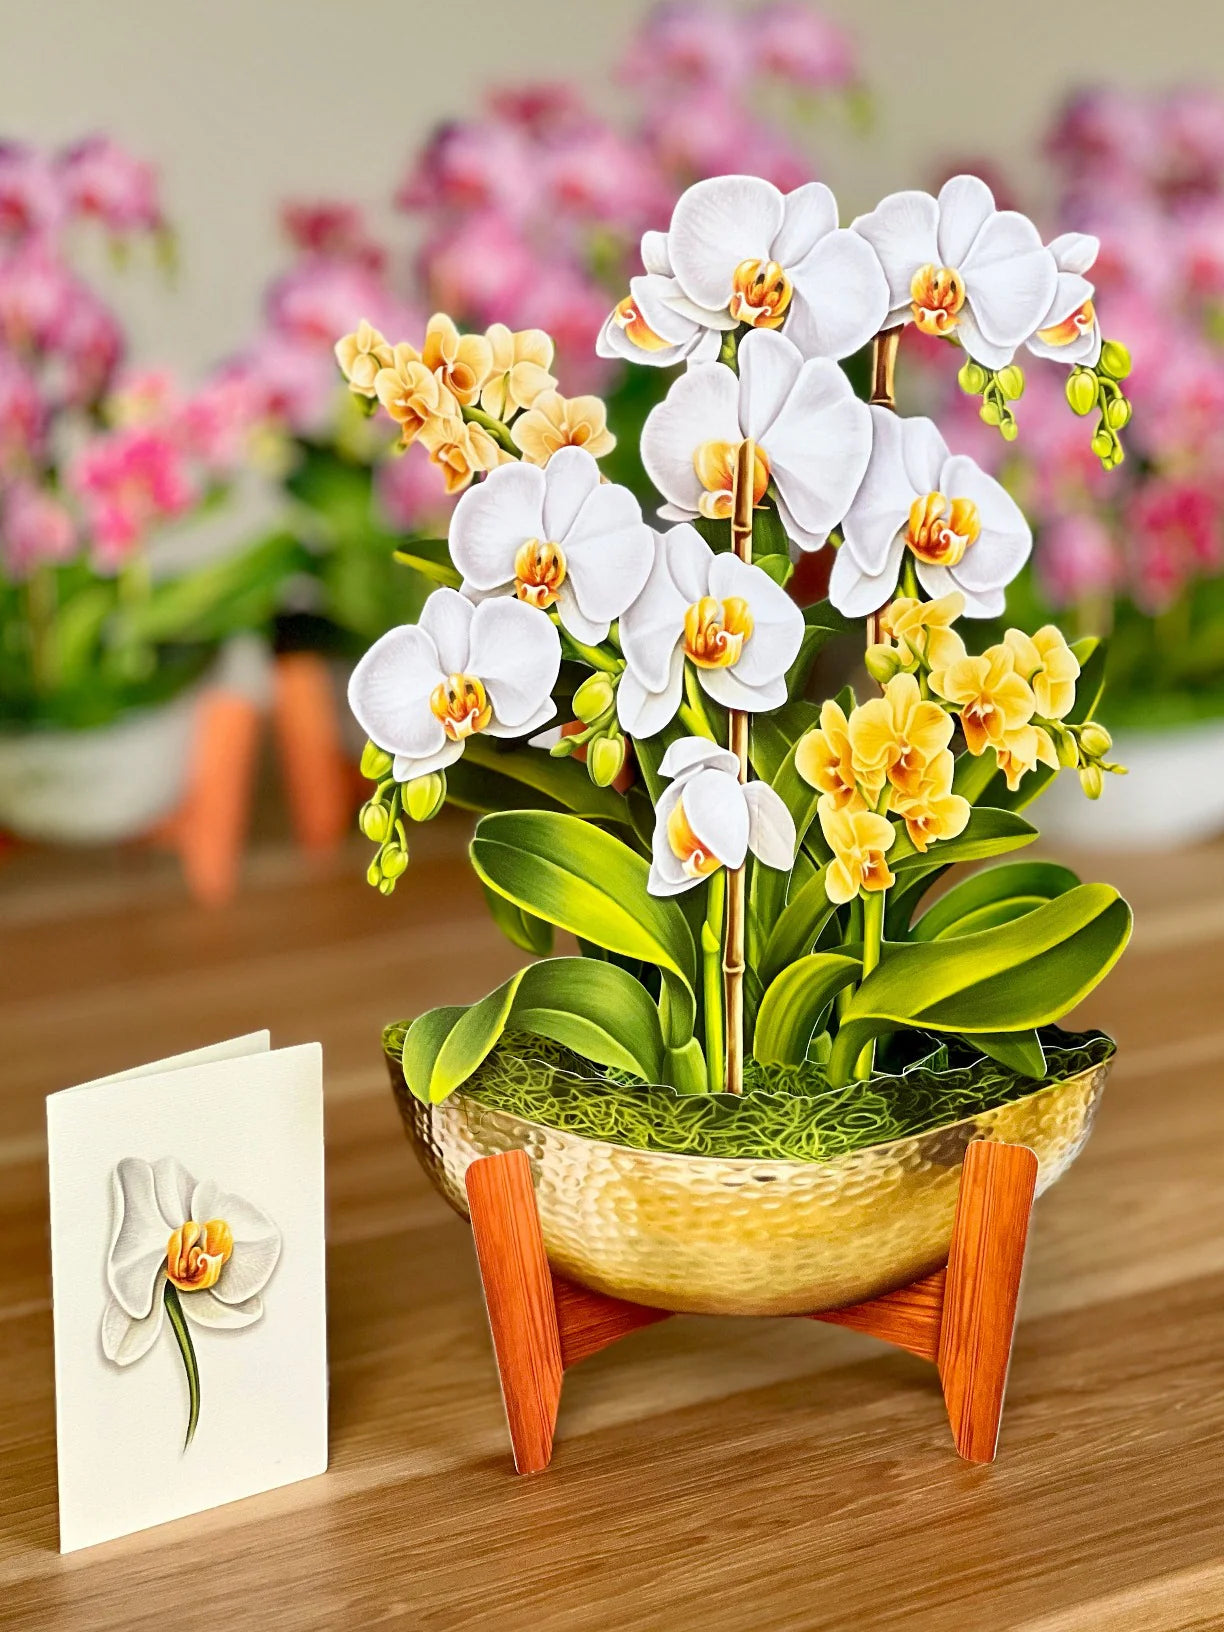 Serenity Orchid Pop Up Flower Bouquet Greeting Card    